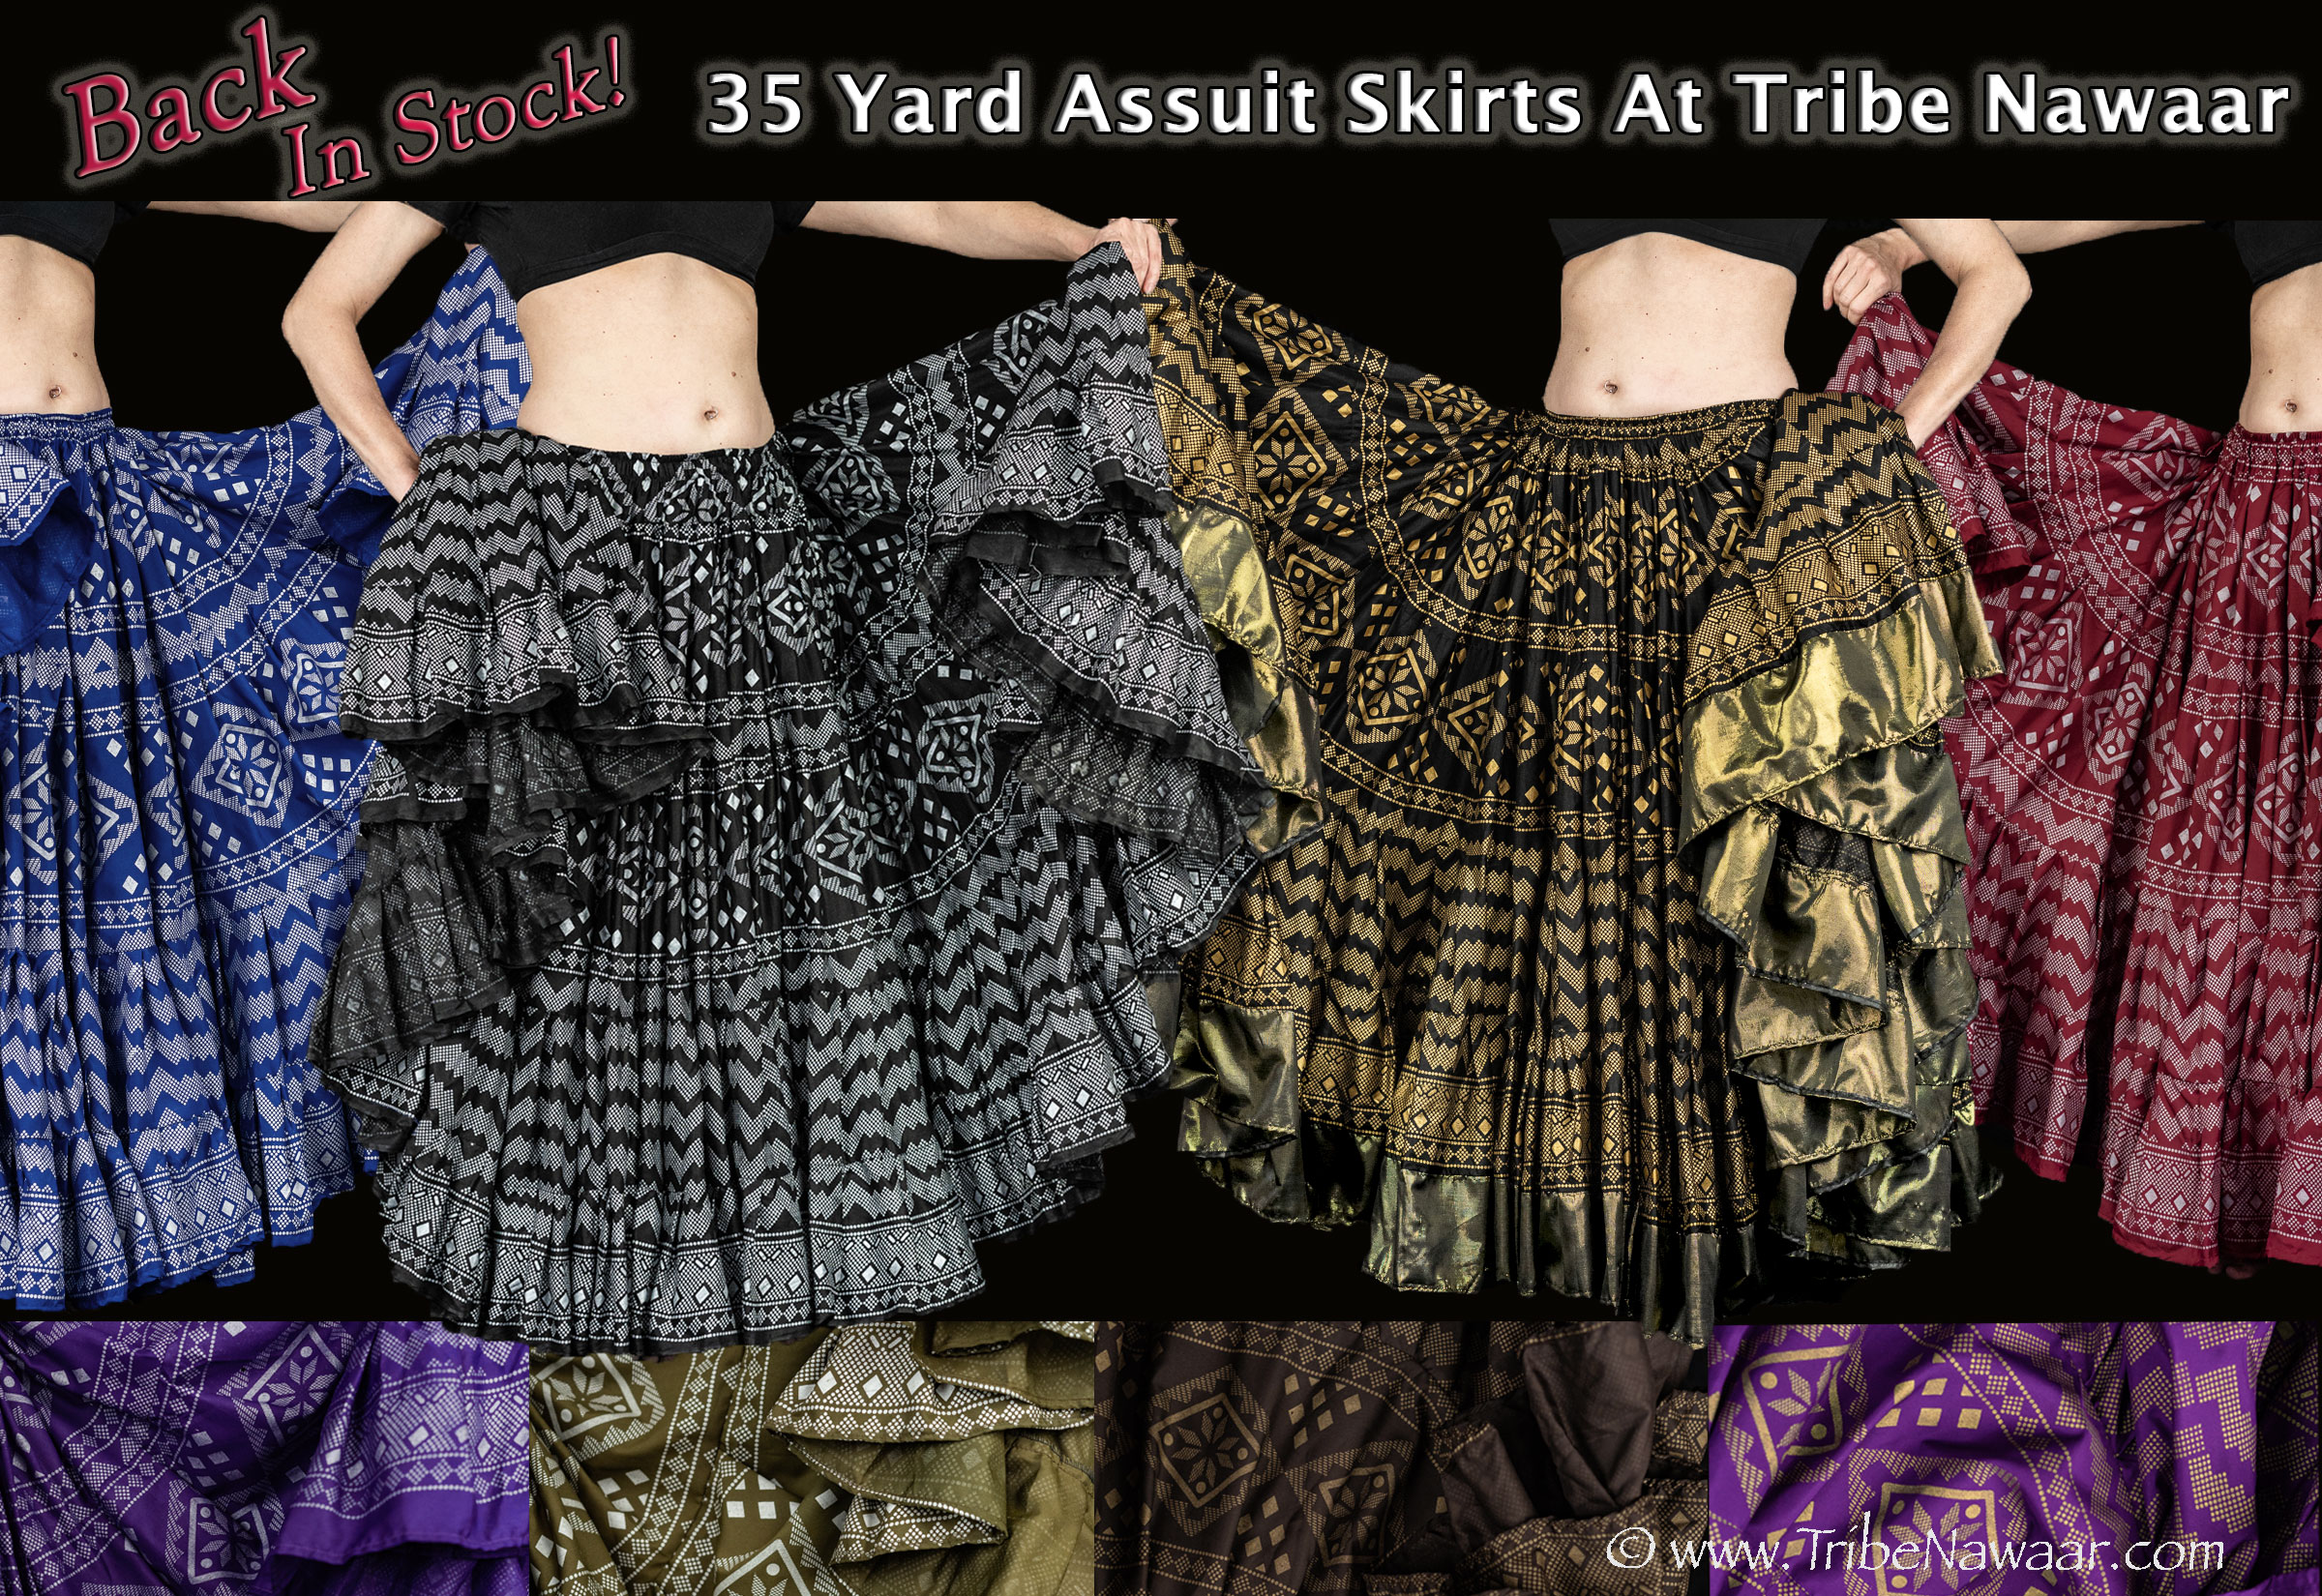 35 yard assuit skirts from Tribe Nawaar